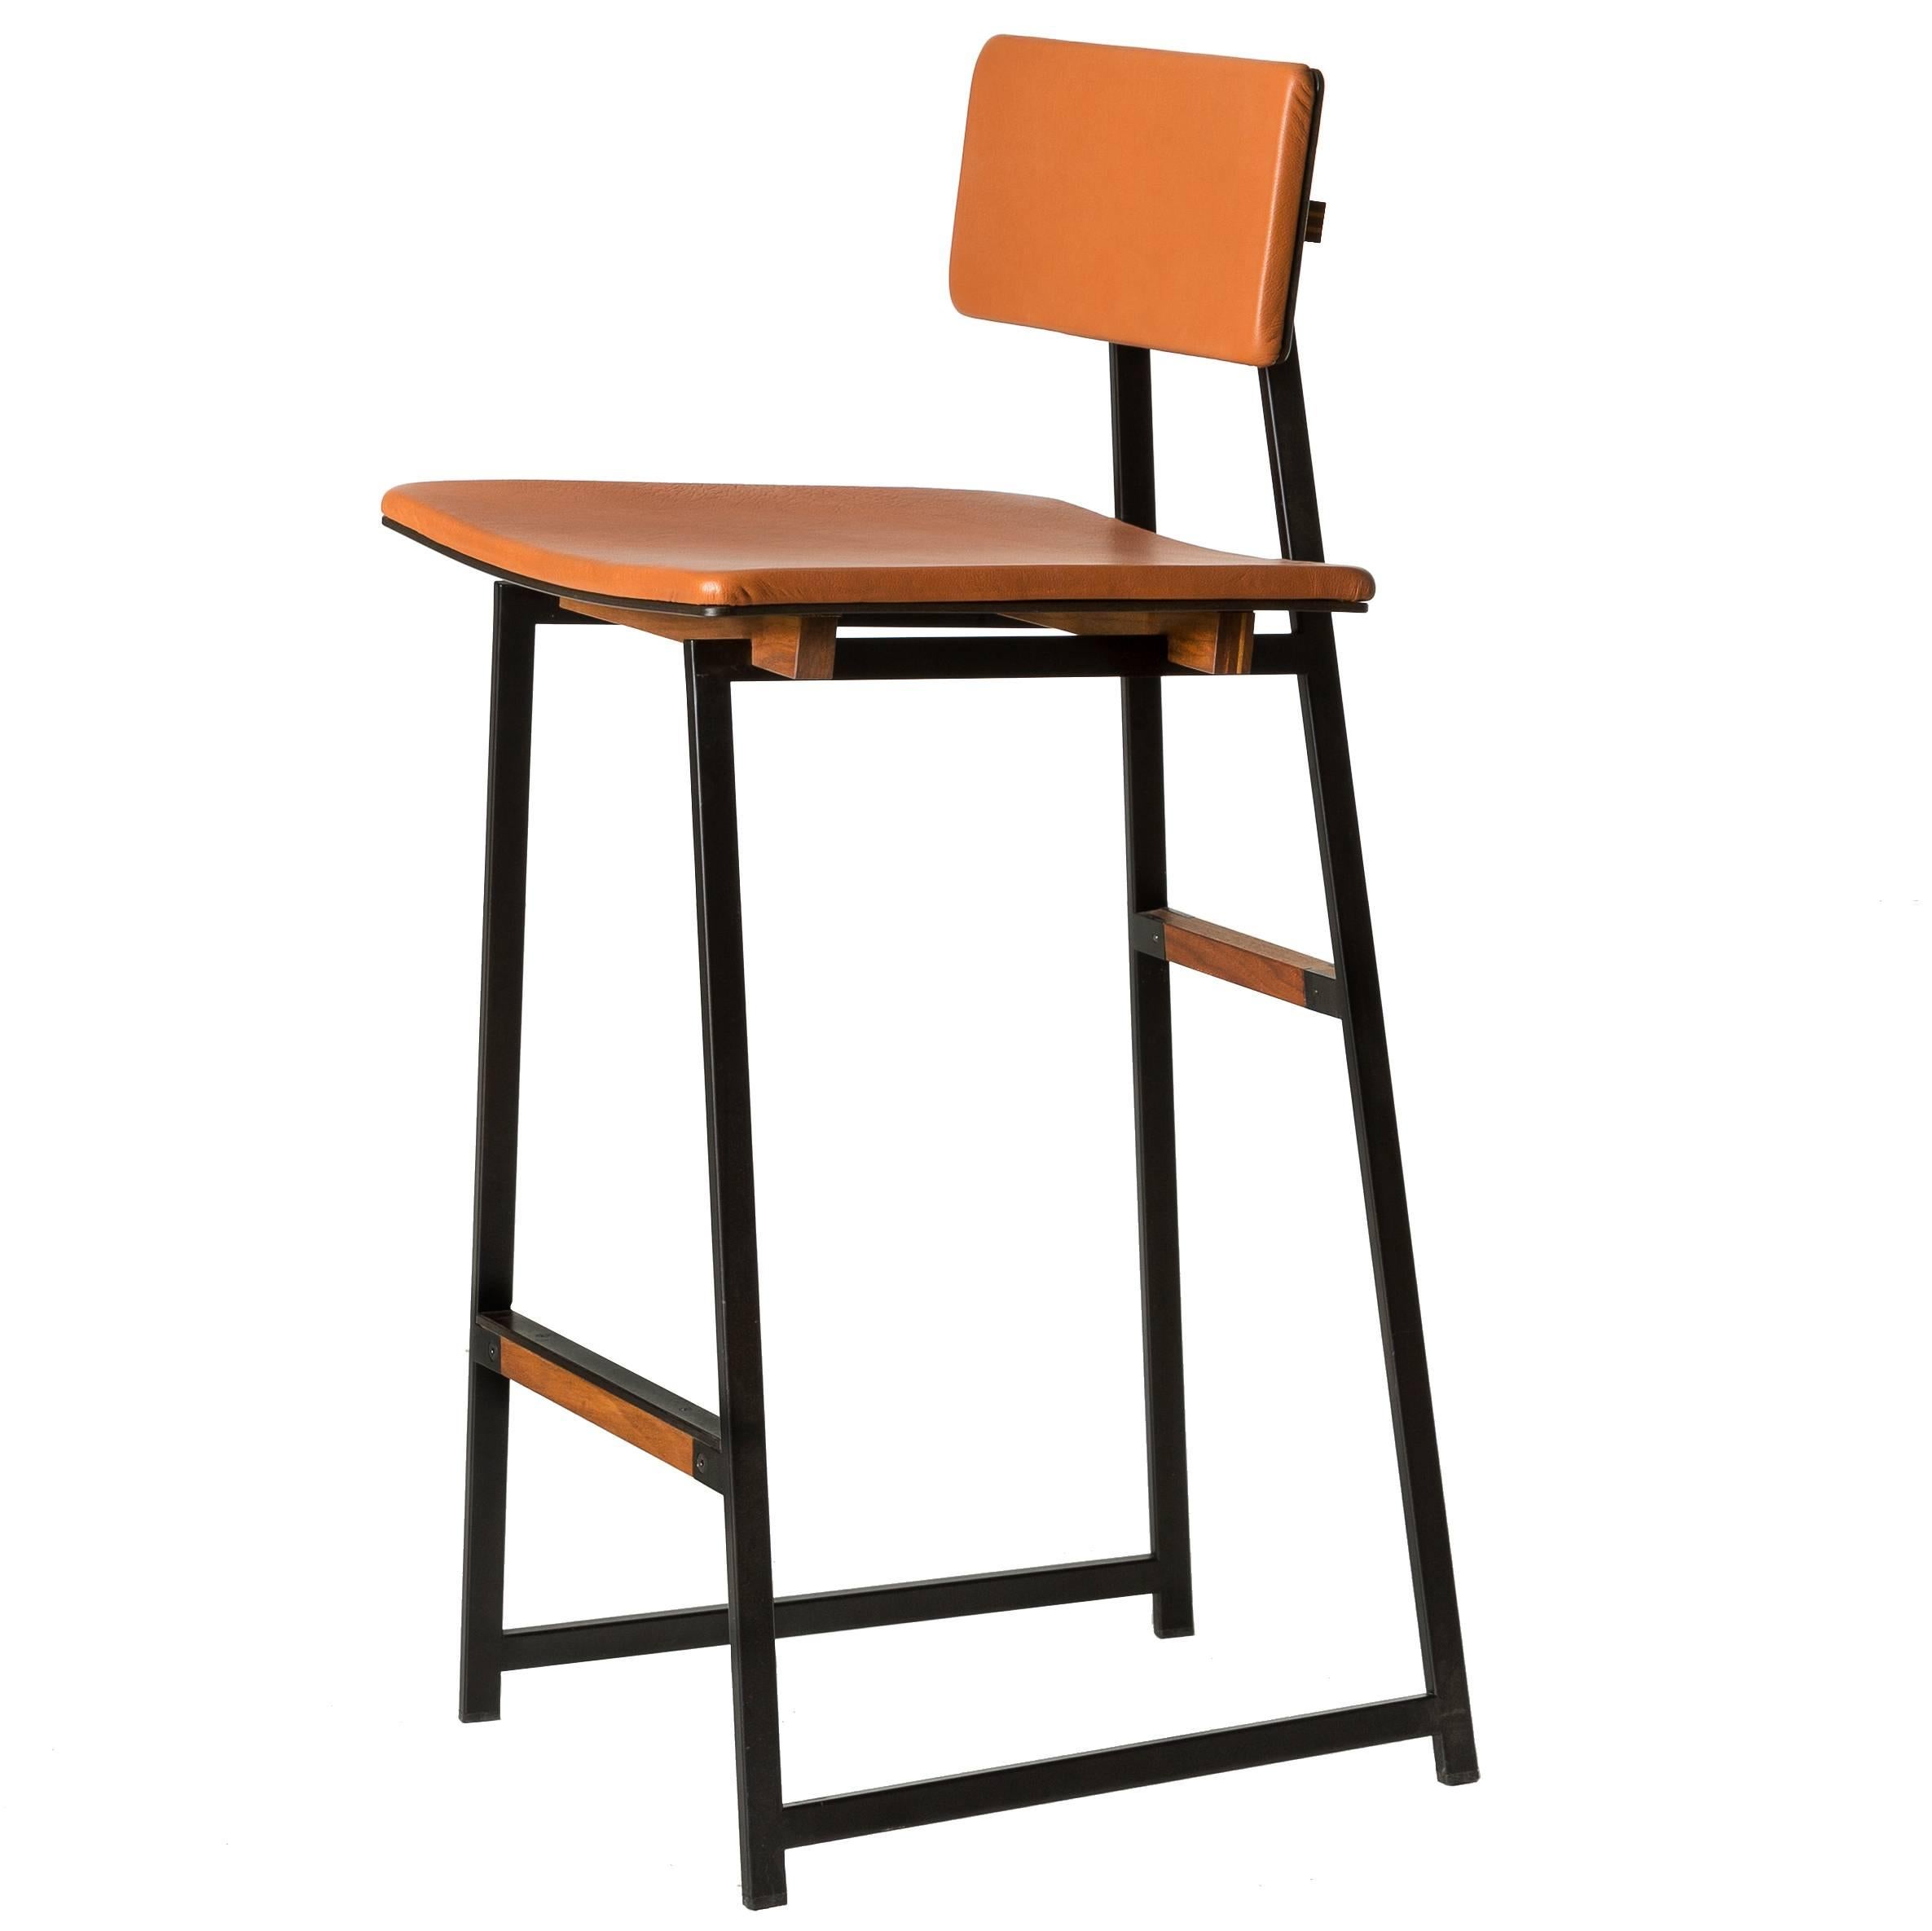 Up Tea Stool in leather, American hardwood and steel For Sale